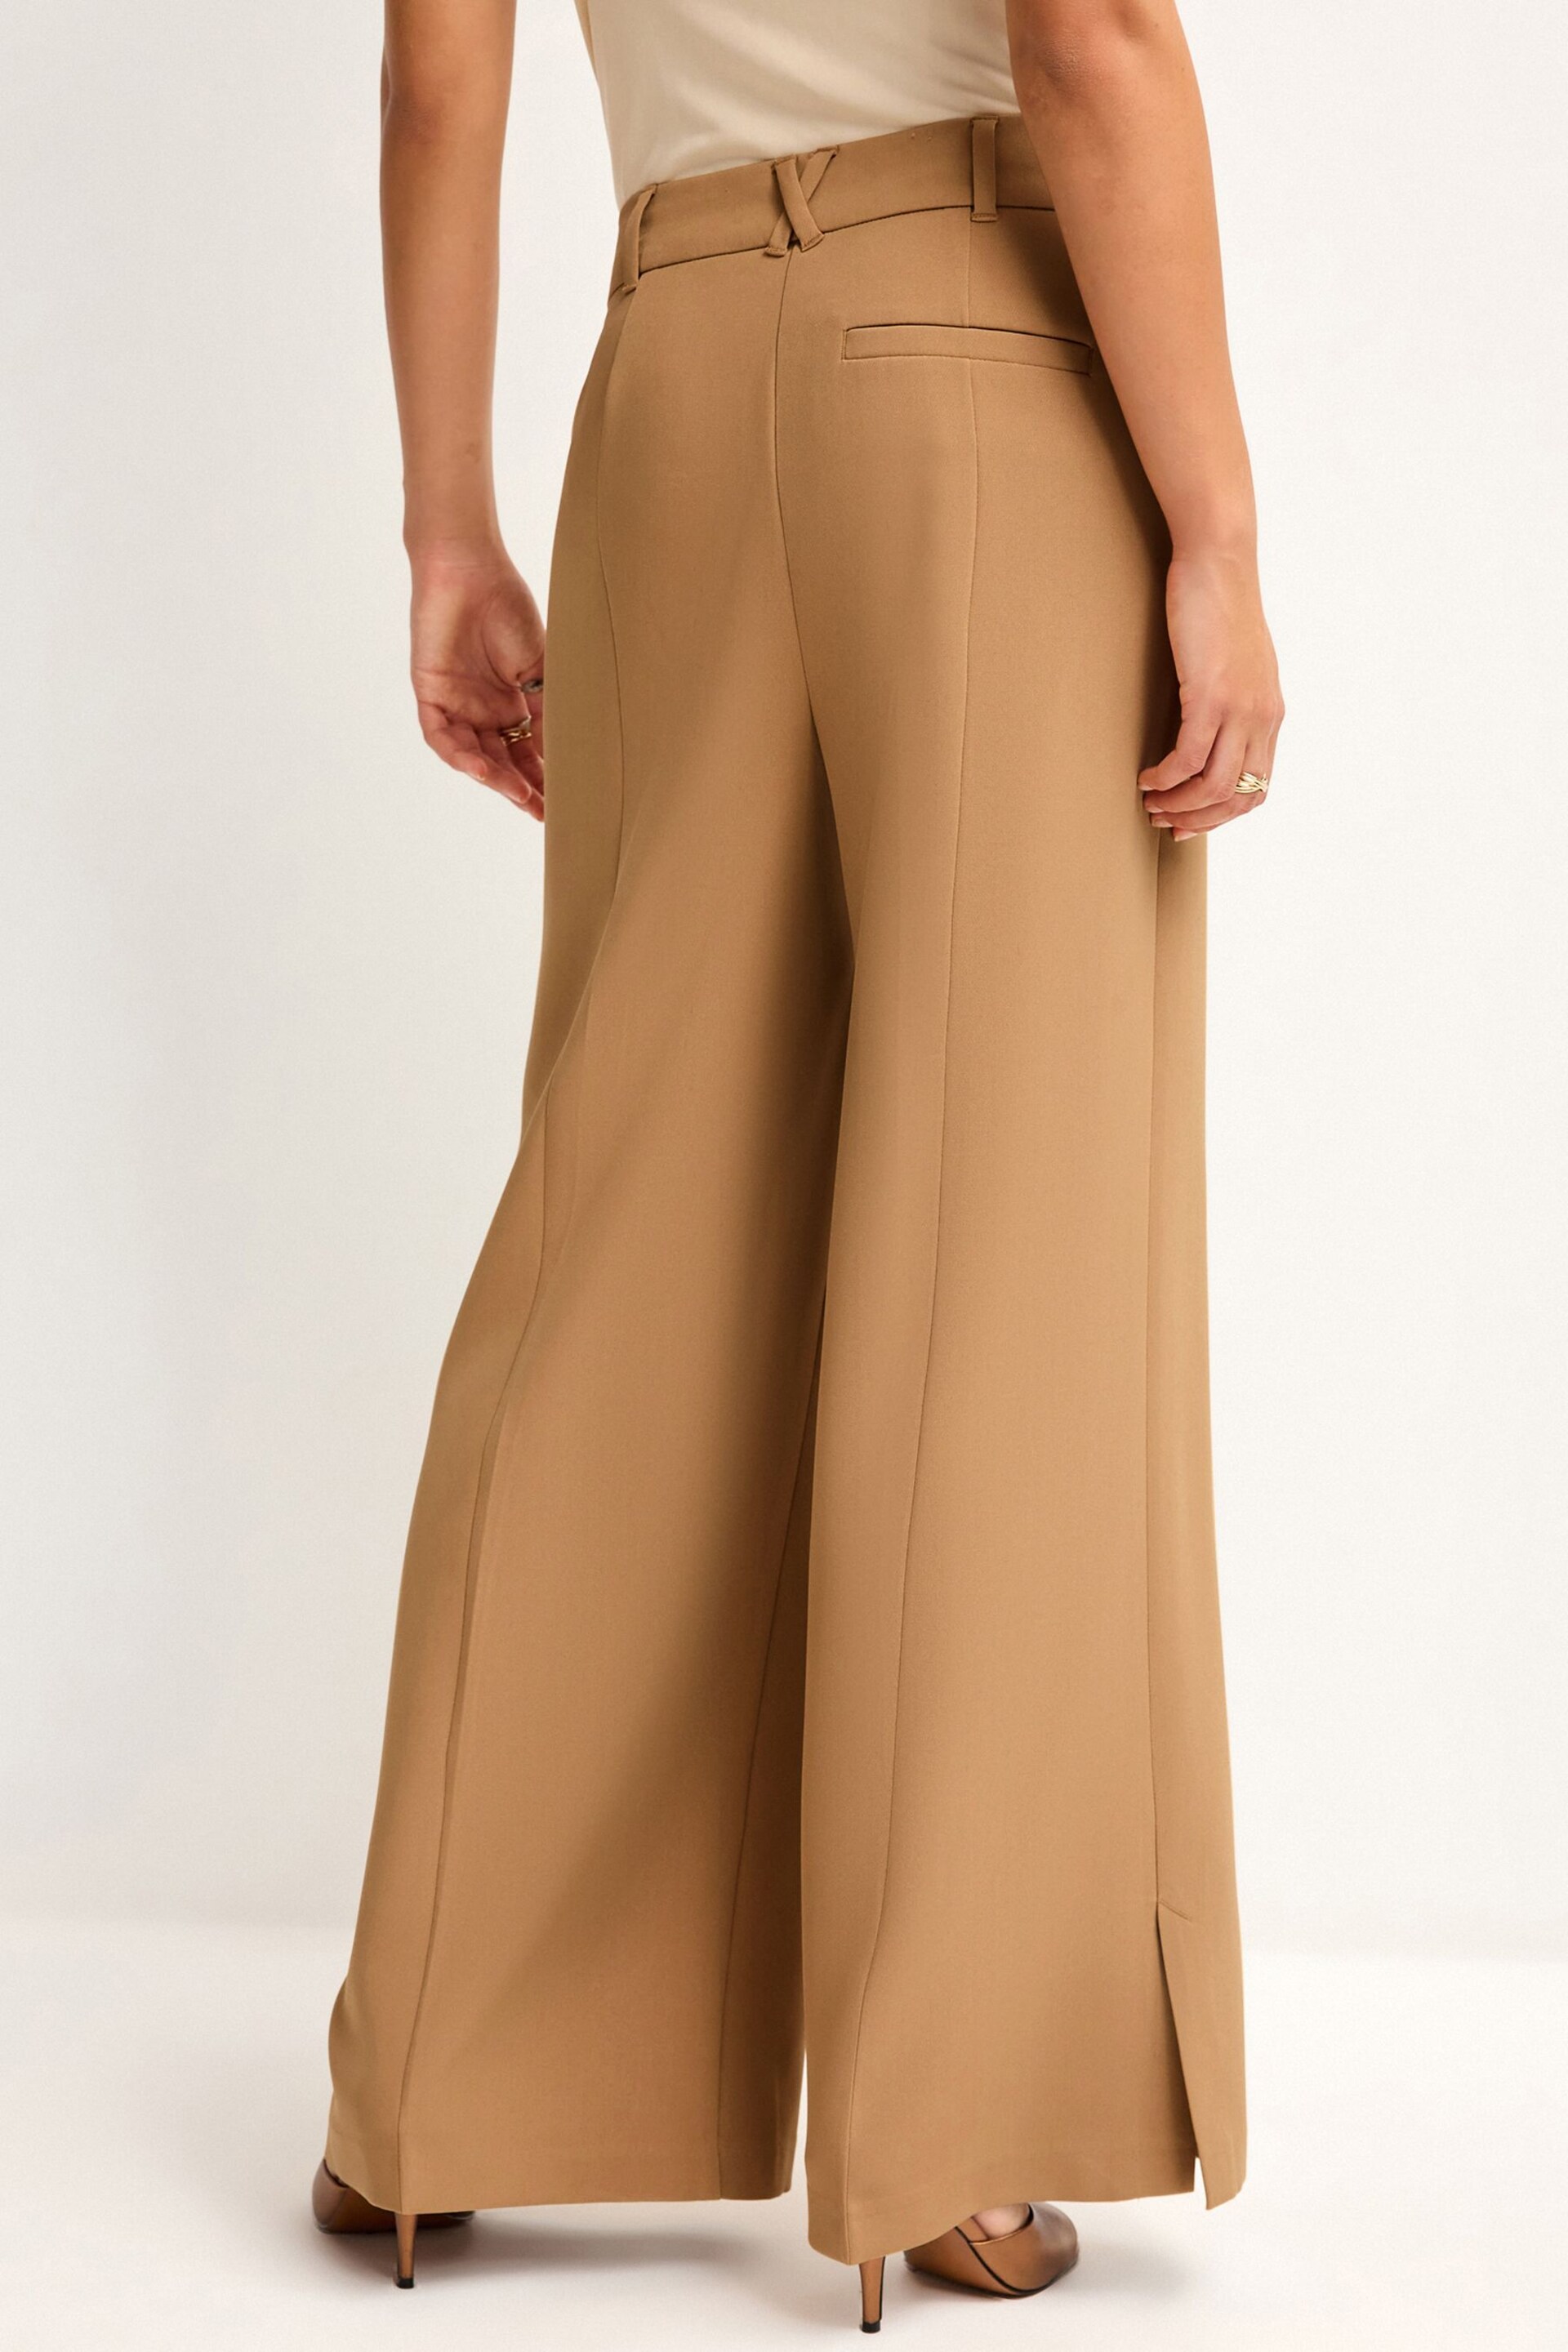 Camel Tailored Mid Rise Wide Leg Trousers - Image 4 of 7